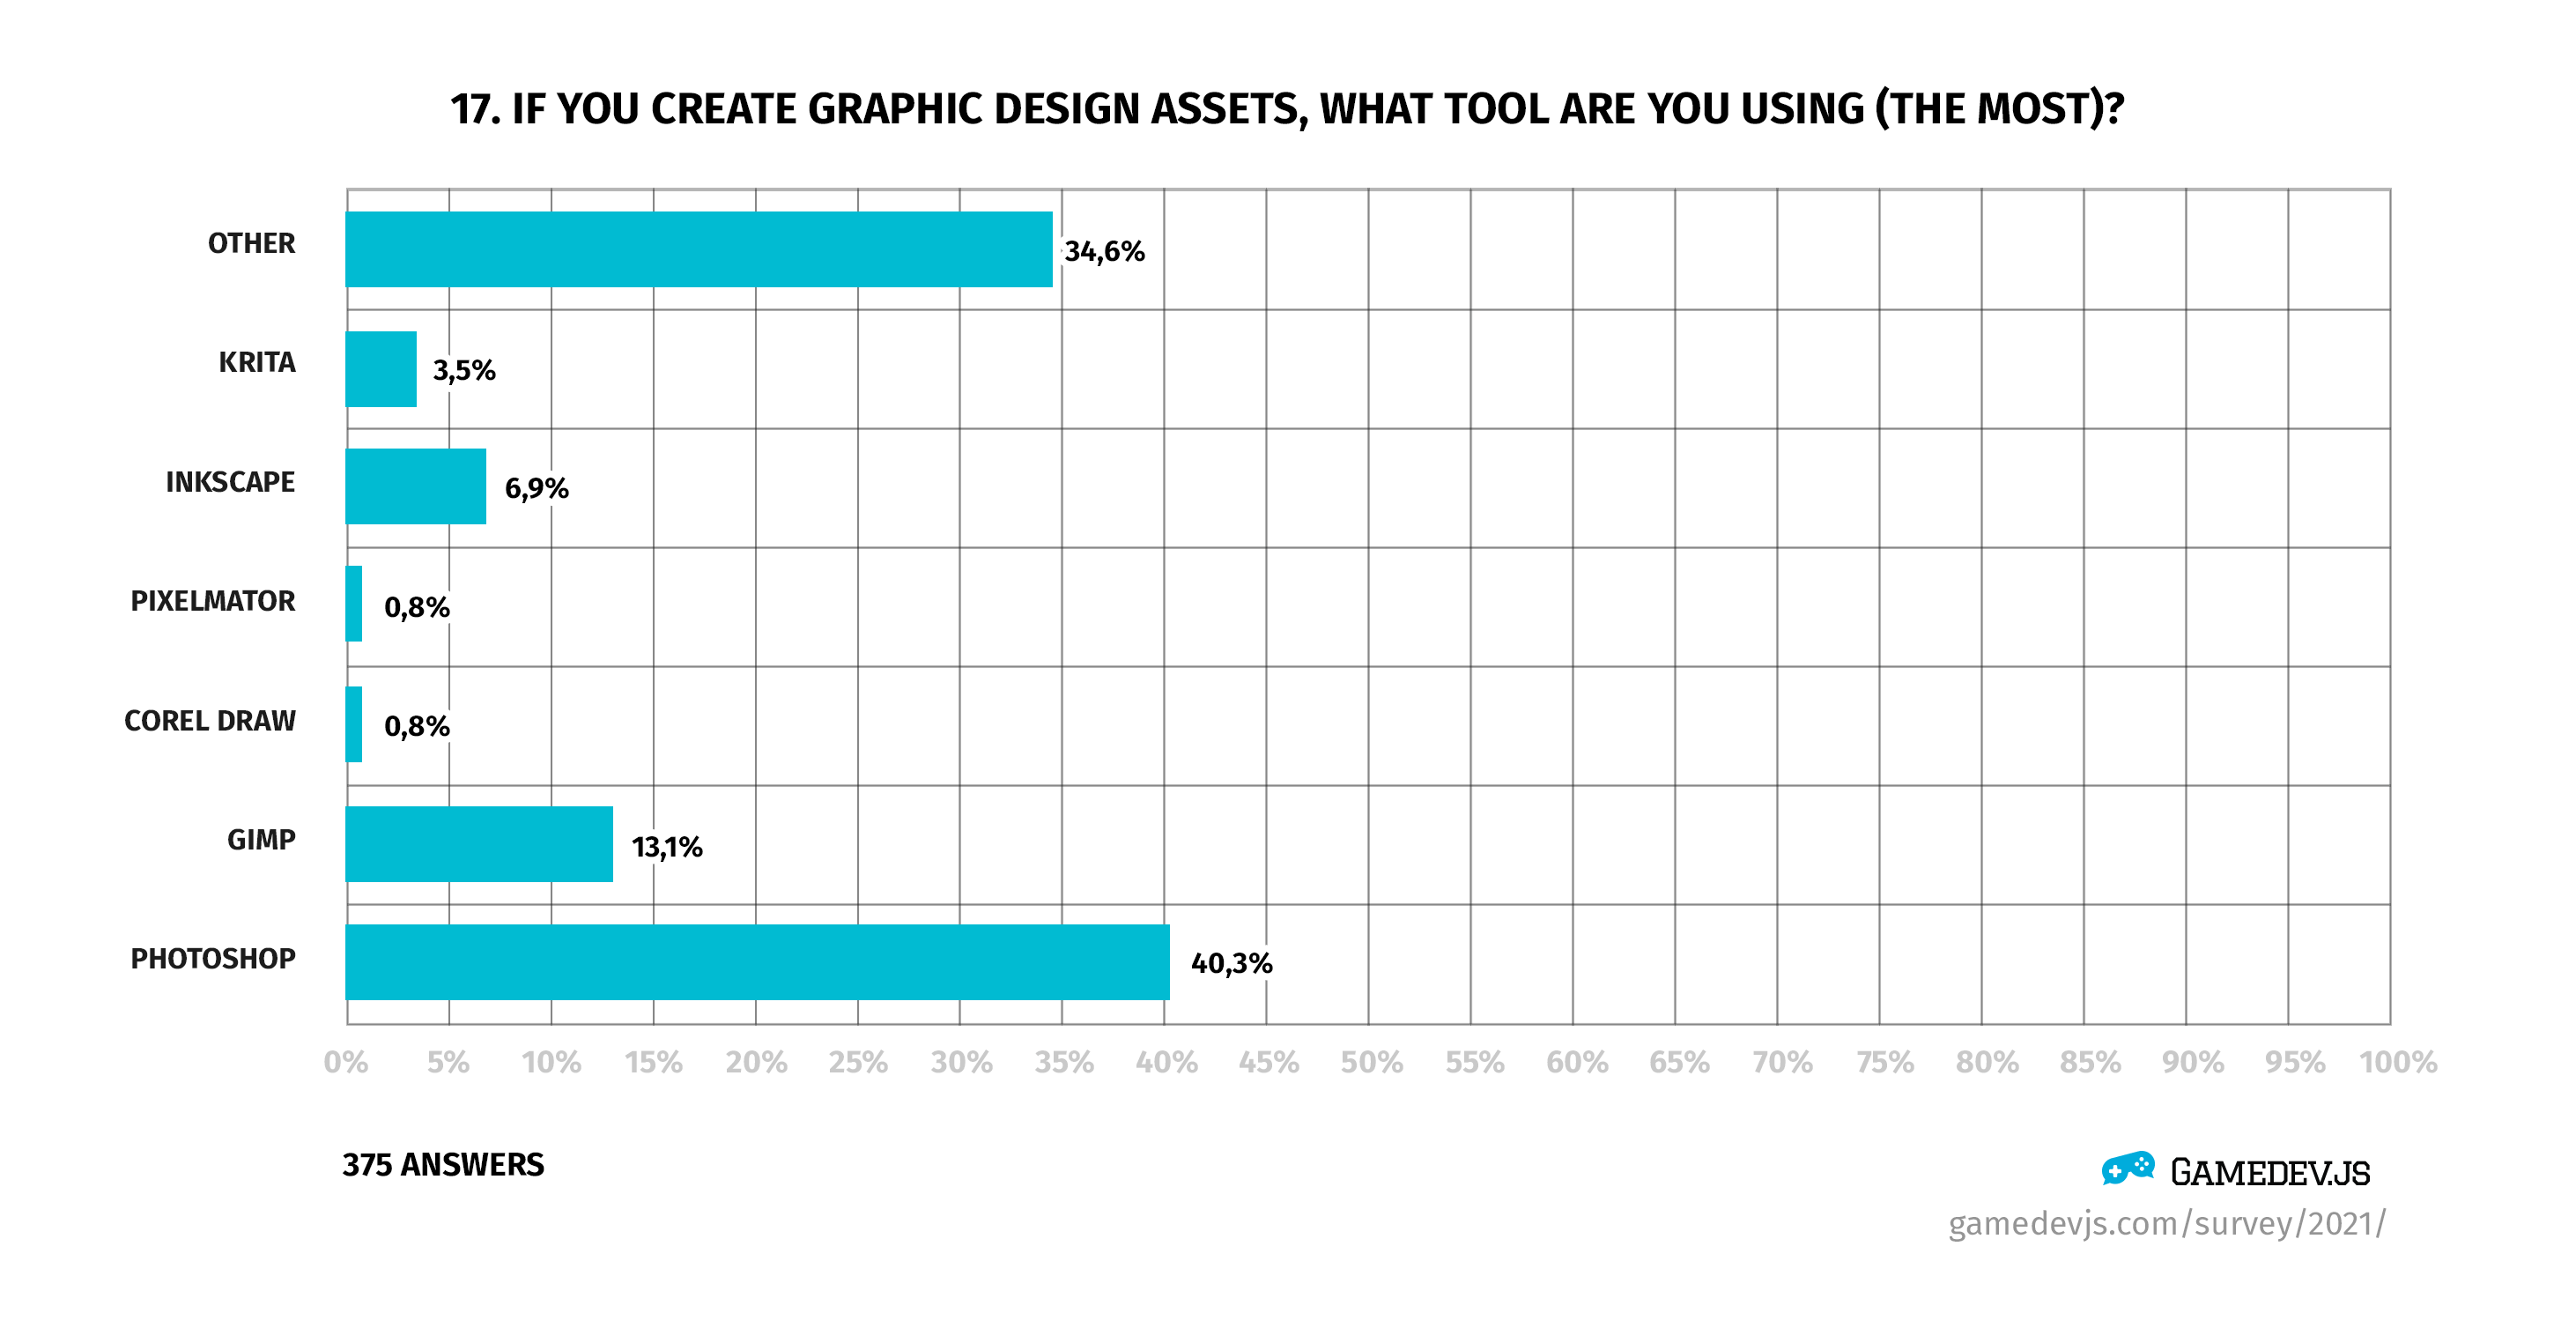 Gamedev.js Survey 2021 - Question #17: If you create graphic design assets, what tool are you using (the most)?